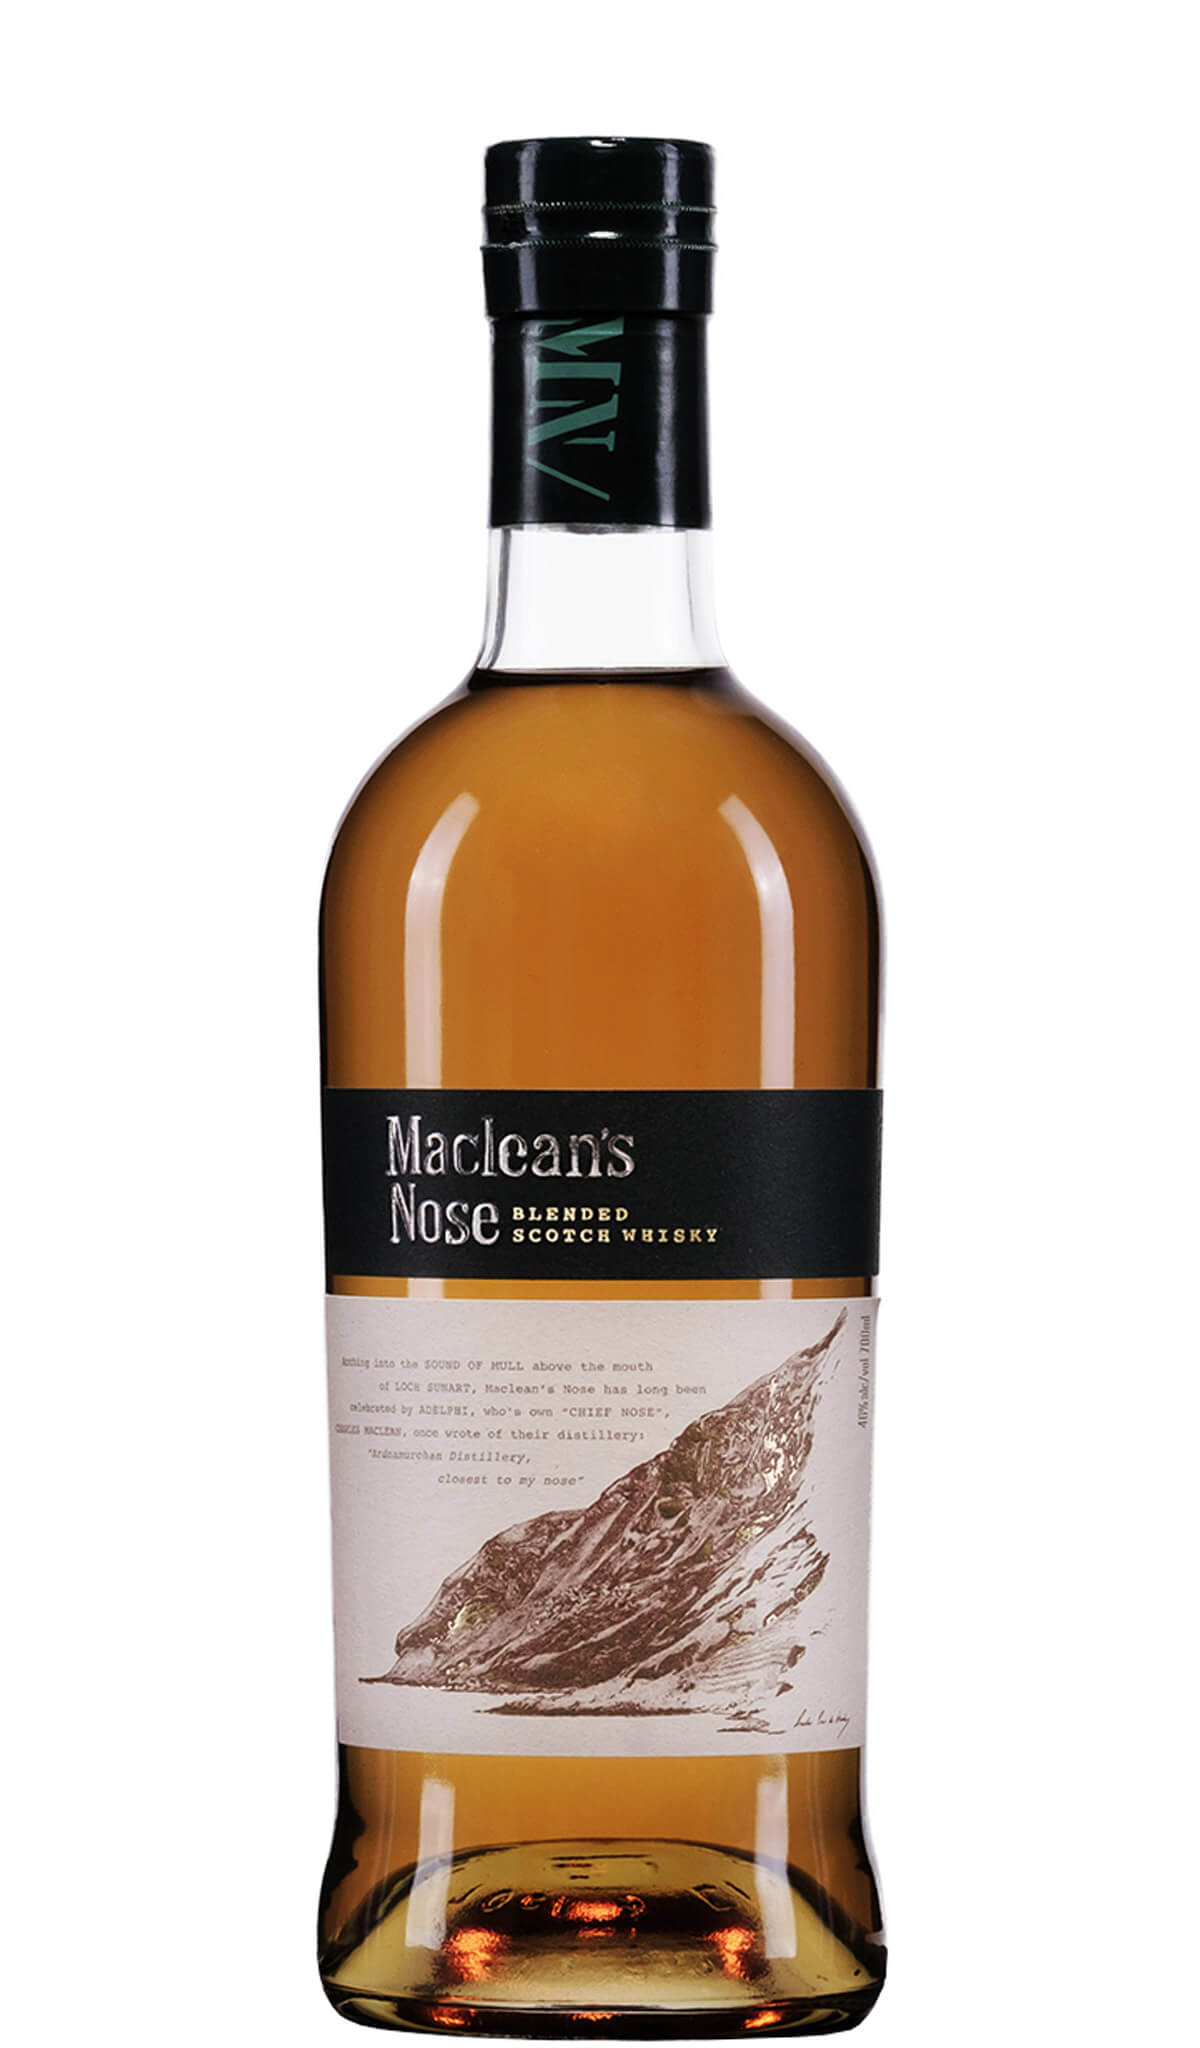 Find out more, explore the range and buy Maclean’s Nose Blended Scotch Whisky 700ml available online at Wine Sellers Direct - Australia's independent liquor specialists.